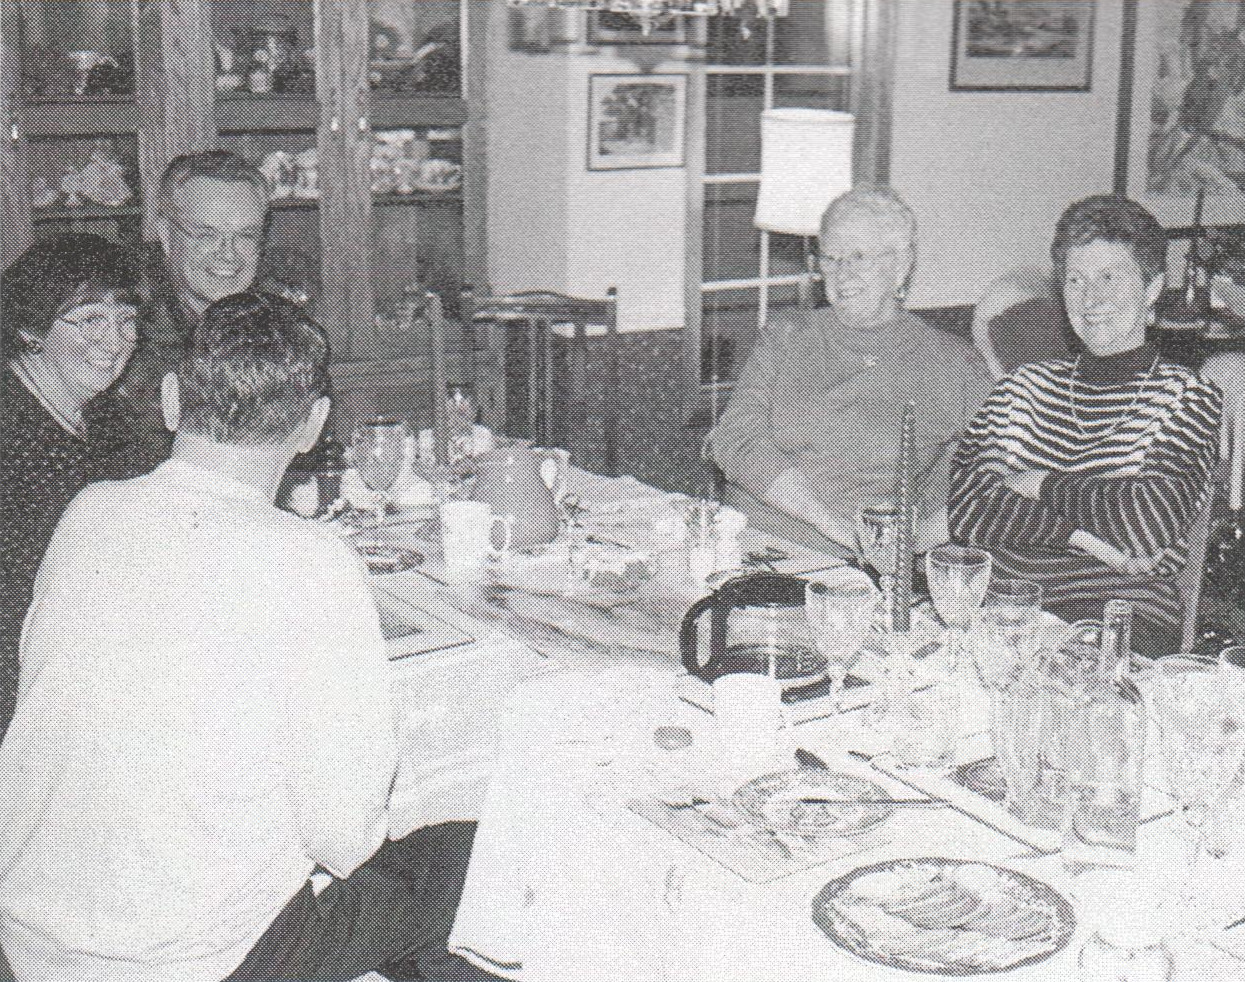 Jim and Lydia Graham enjoying one of many fellowship dinners with Grete and Ben Greenfield and Pauline Murray